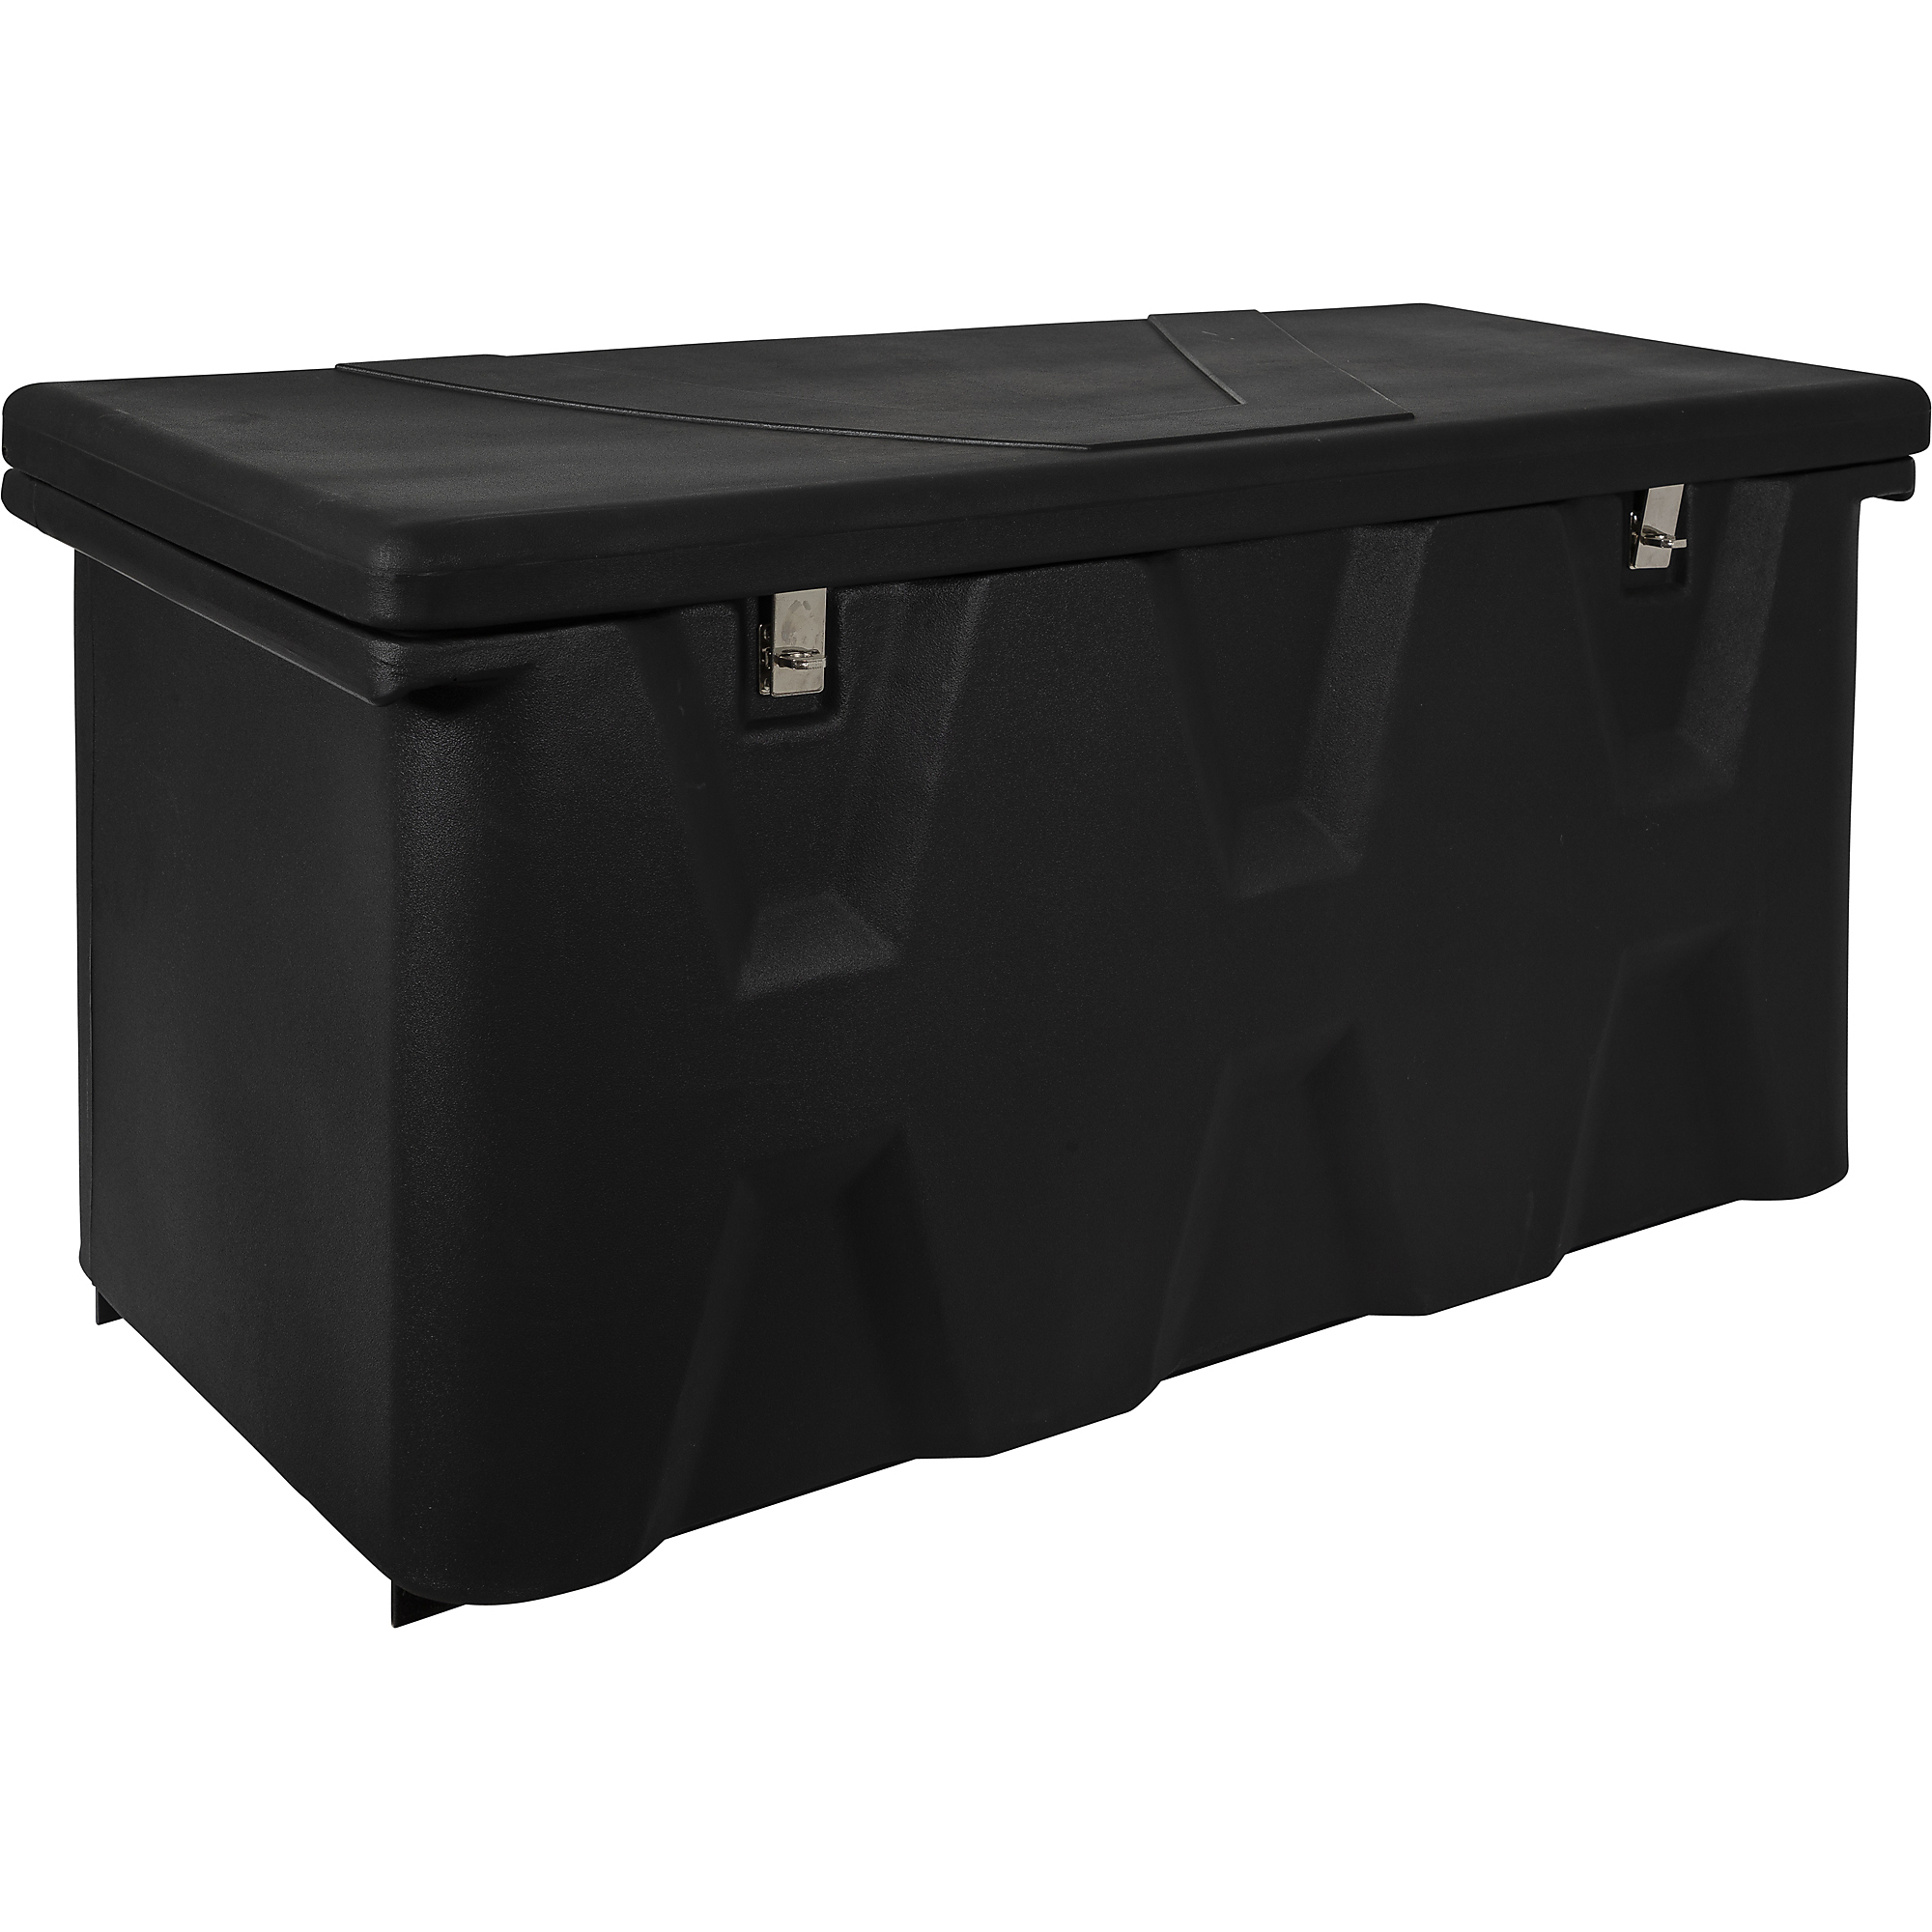 Buyers Products, Hitch-Mounted Poly Cargo Carrier, Width 51 in, Material Polyethylene, Color Finish Matte Black, Model 1707020